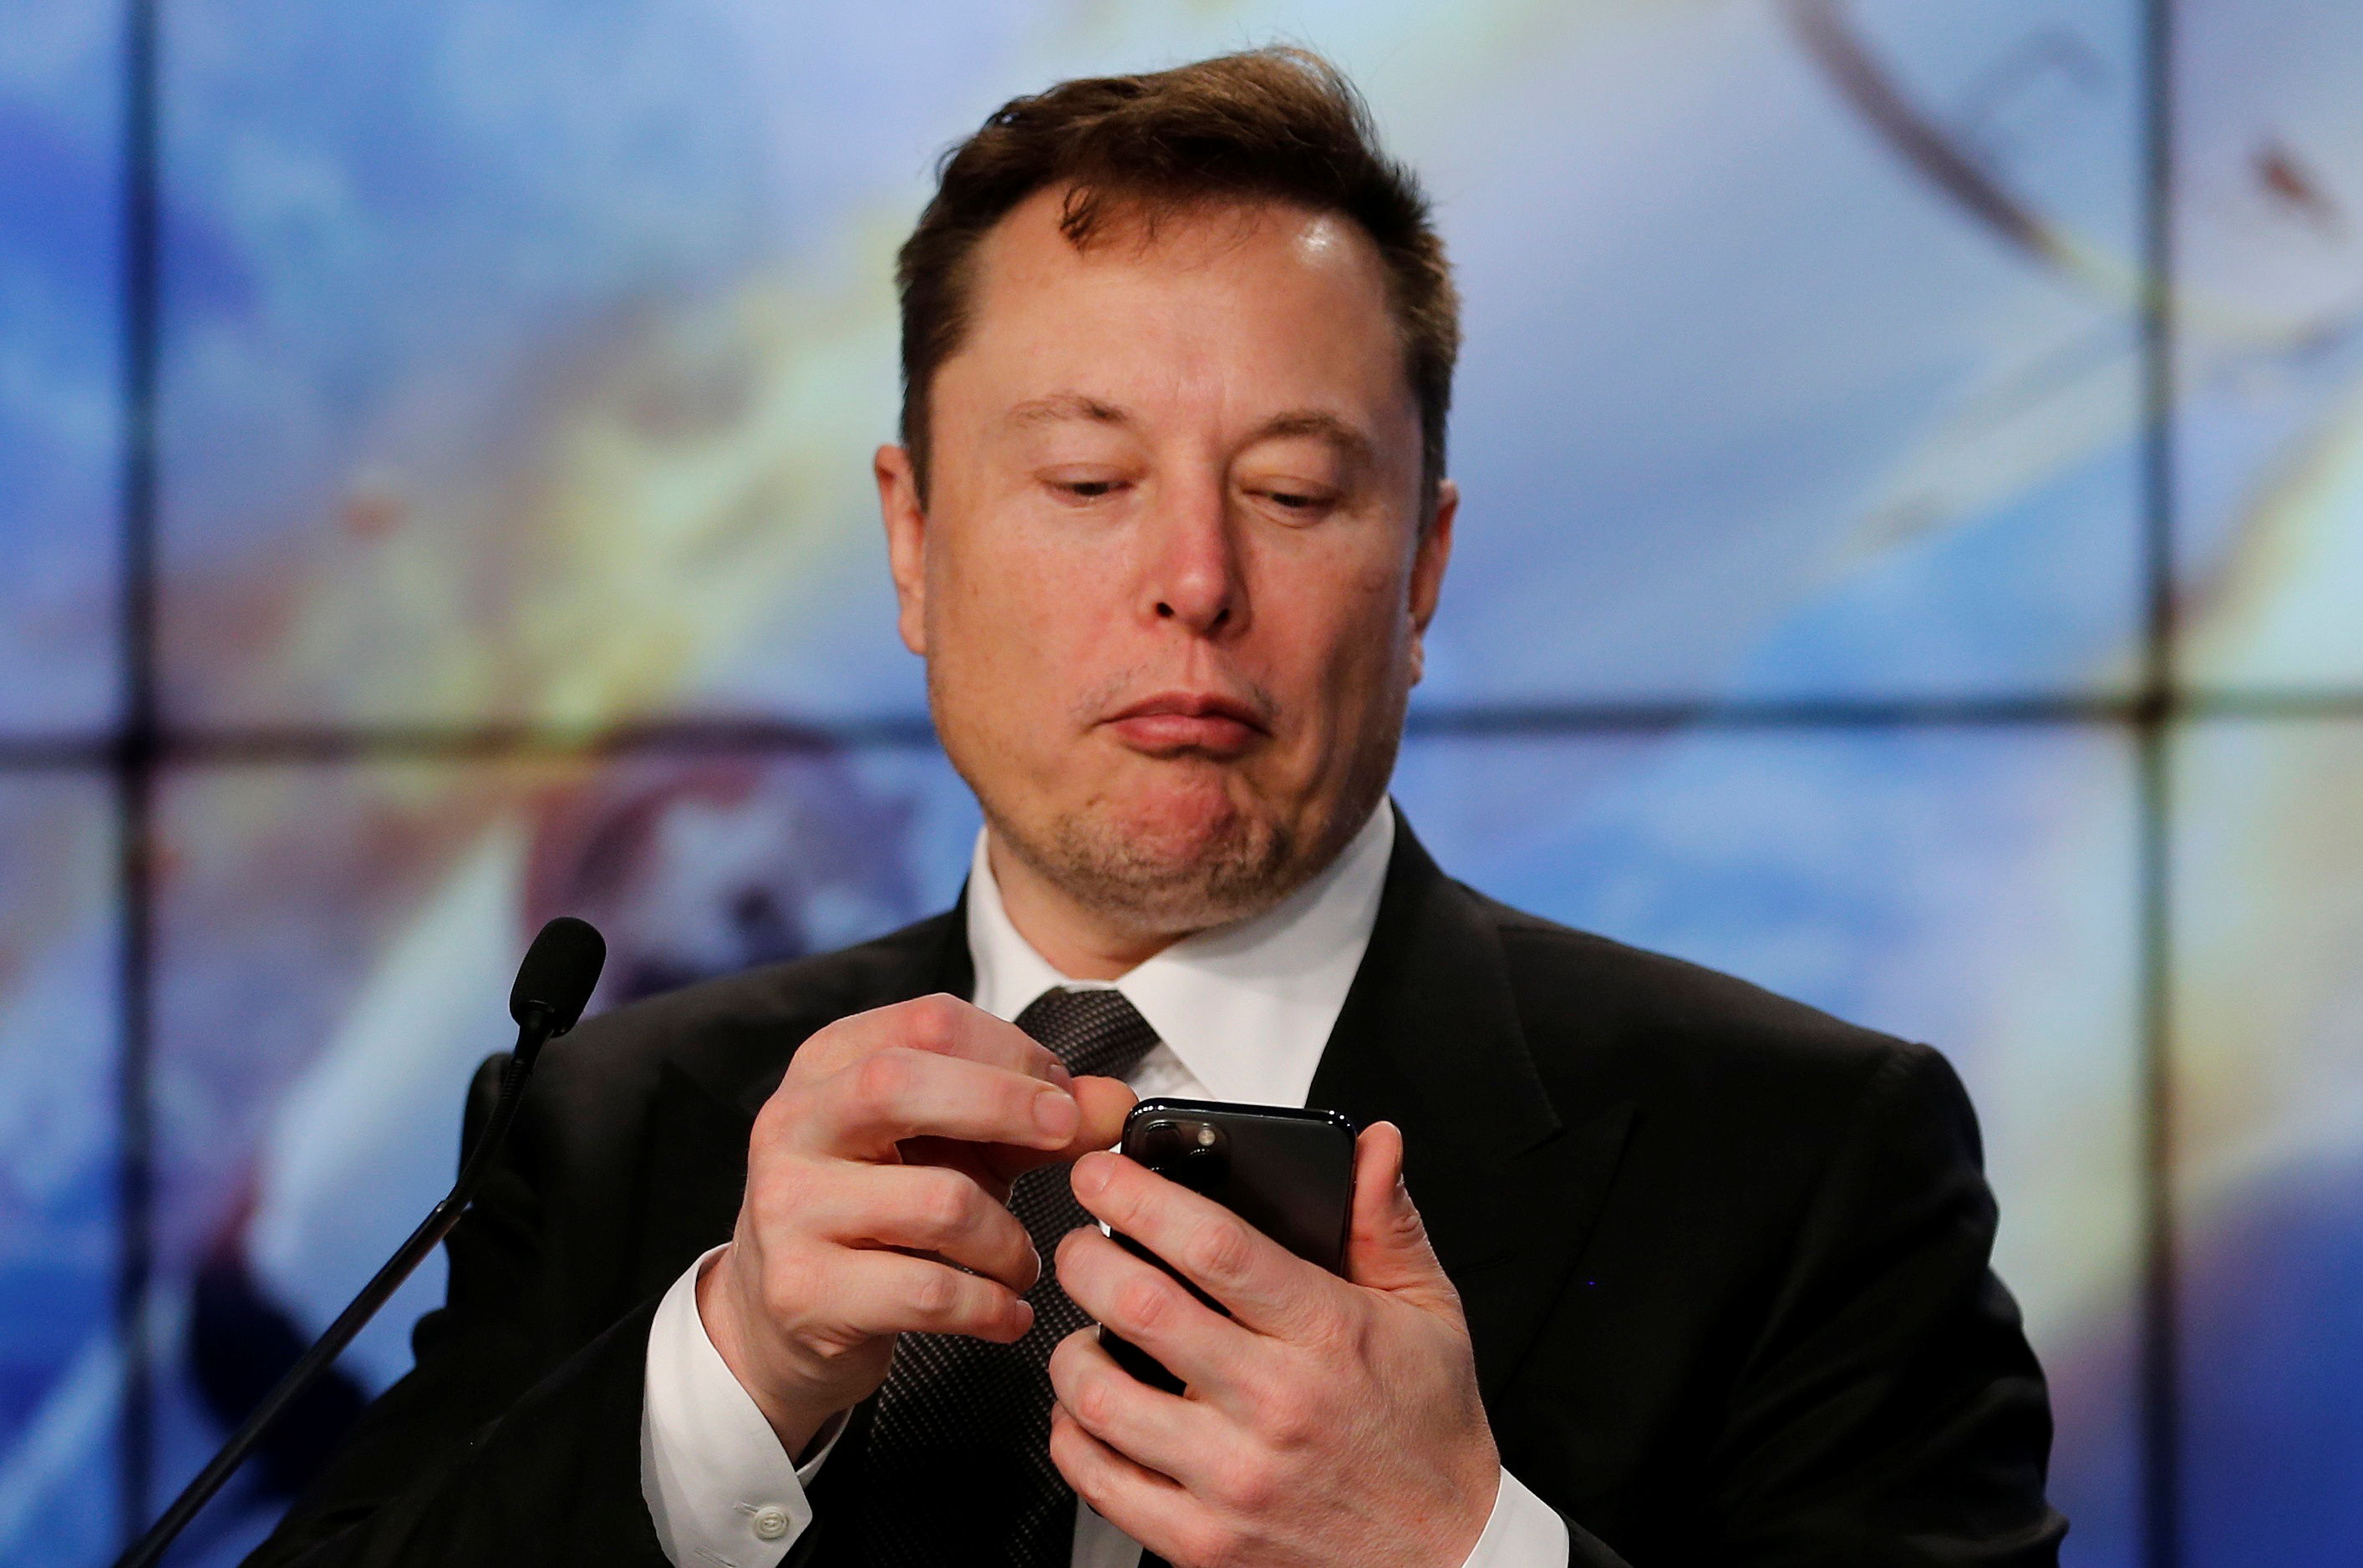 SpaceX founder and chief engineer Elon Musk looks at his mobile phone during a post-launch news conference to discuss the  SpaceX Crew Dragon astronaut capsule in-flight abort test at the Kennedy Space Center